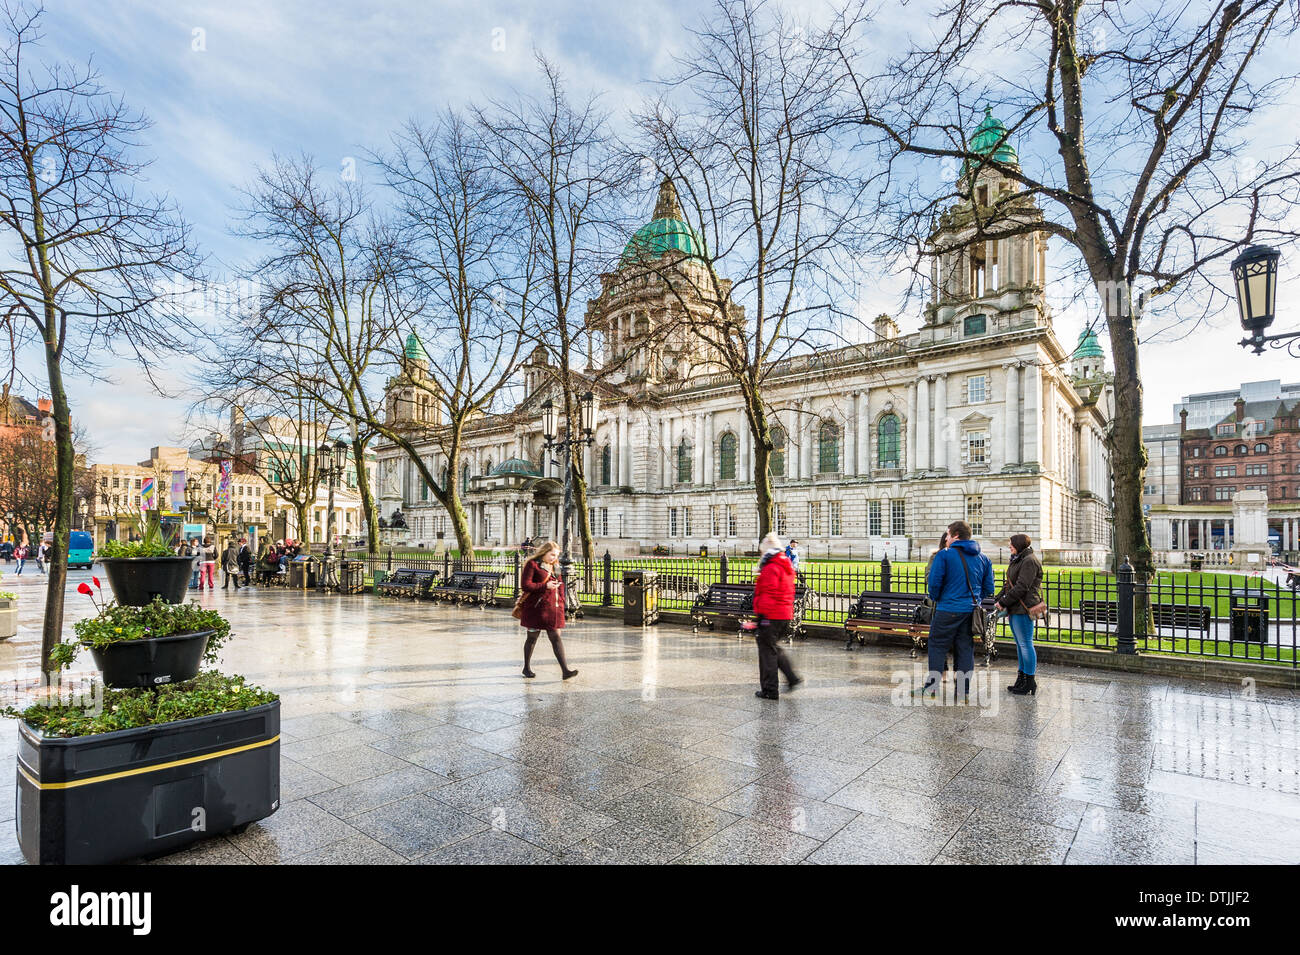 Belfast City Hall is Belfast City Council's civic building. It is located in Donegall Square, in the heart of Belfast city centr Stock Photo